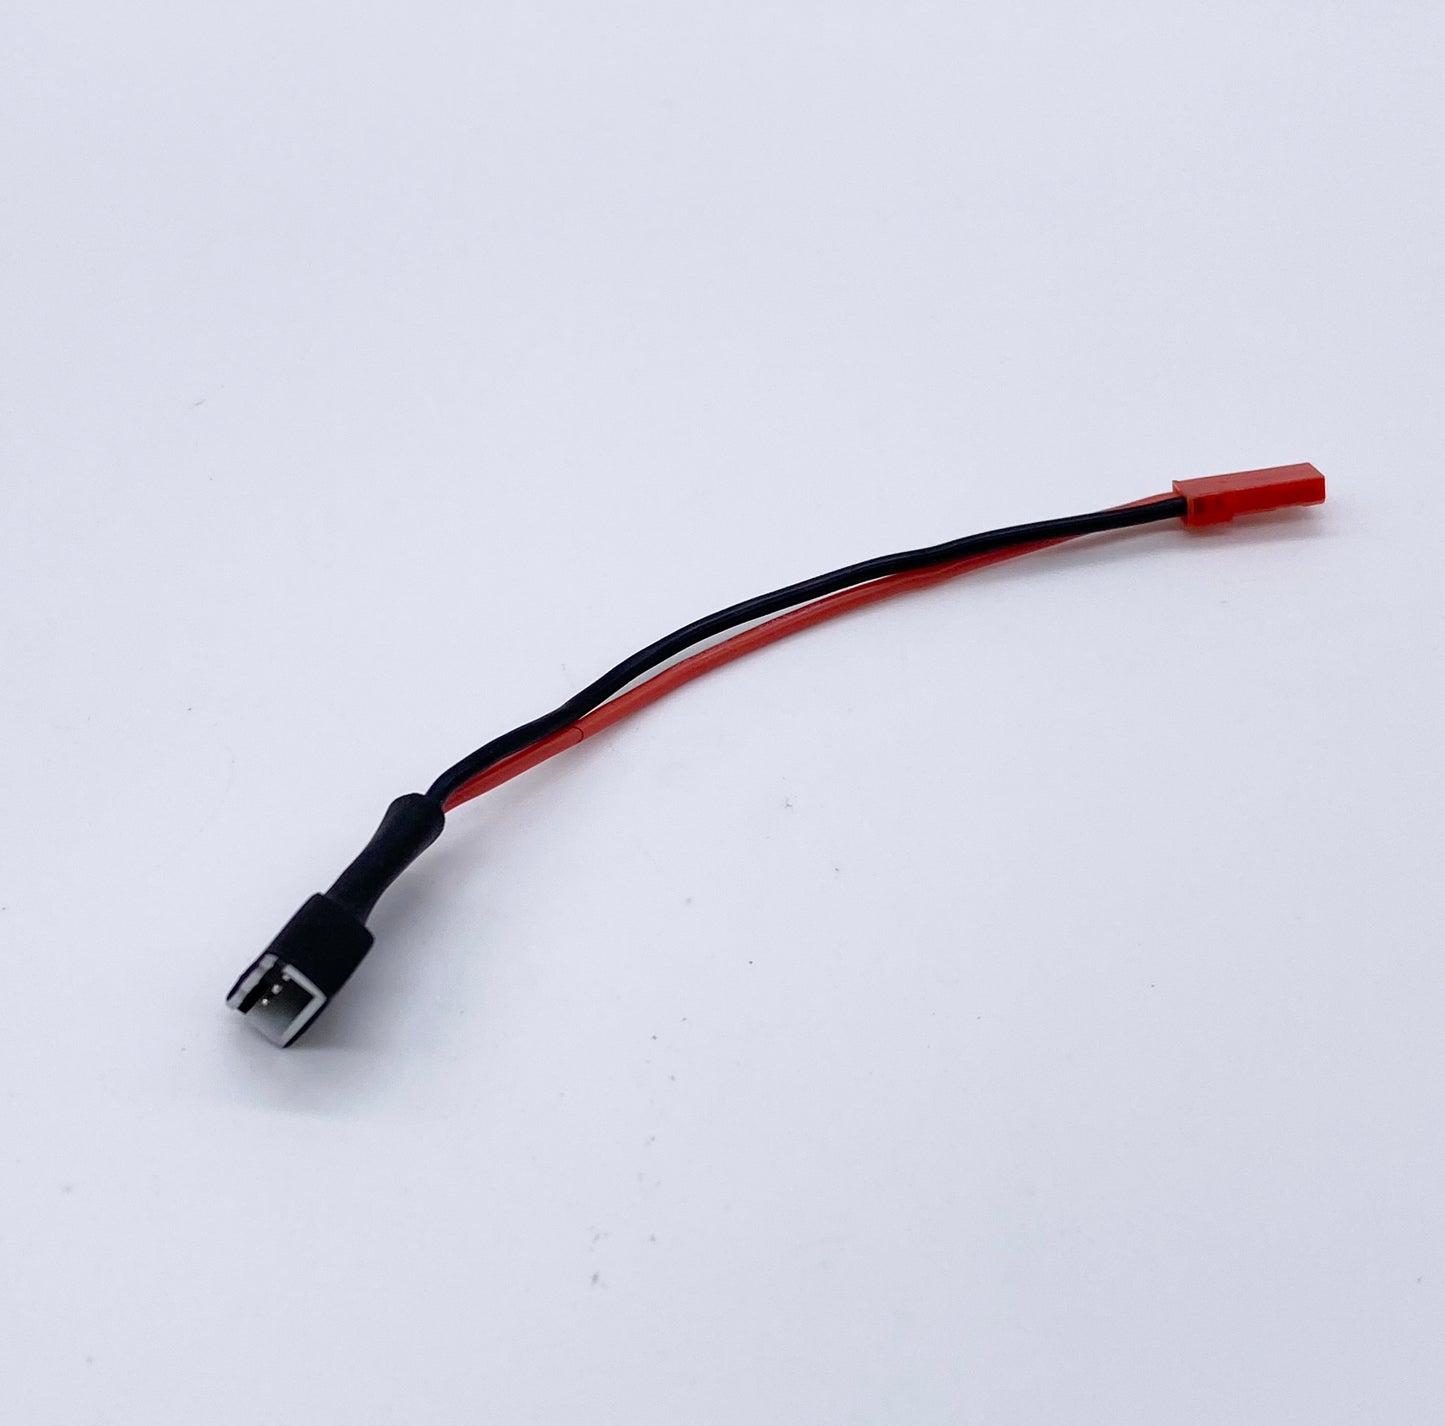 REEFS RC 2S LiPo Connector